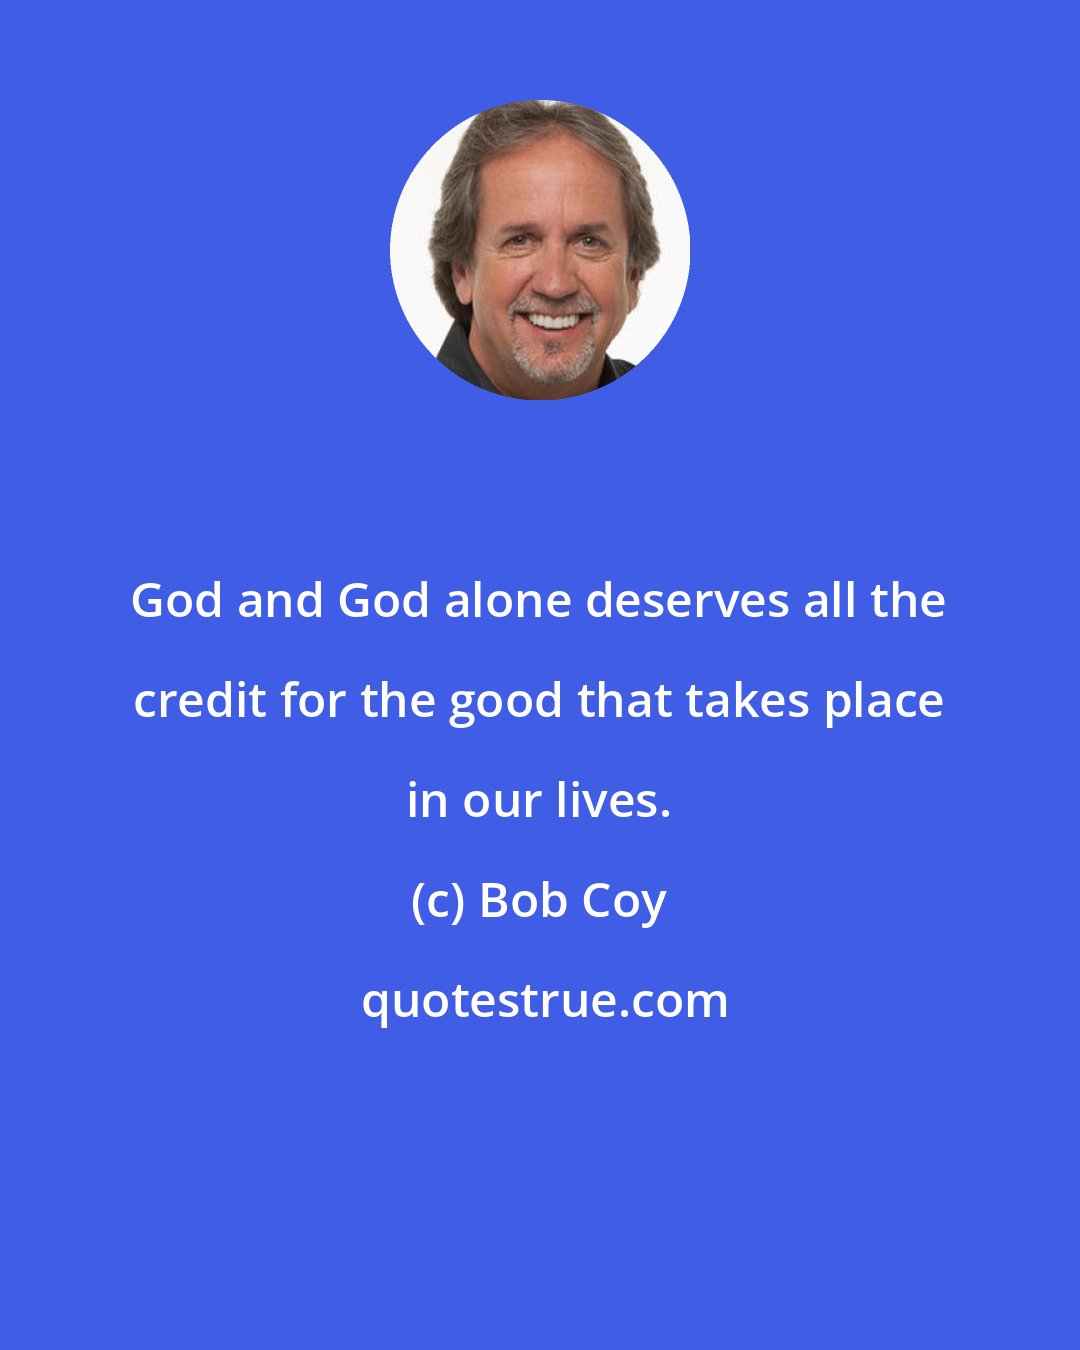 Bob Coy: God and God alone deserves all the credit for the good that takes place in our lives.